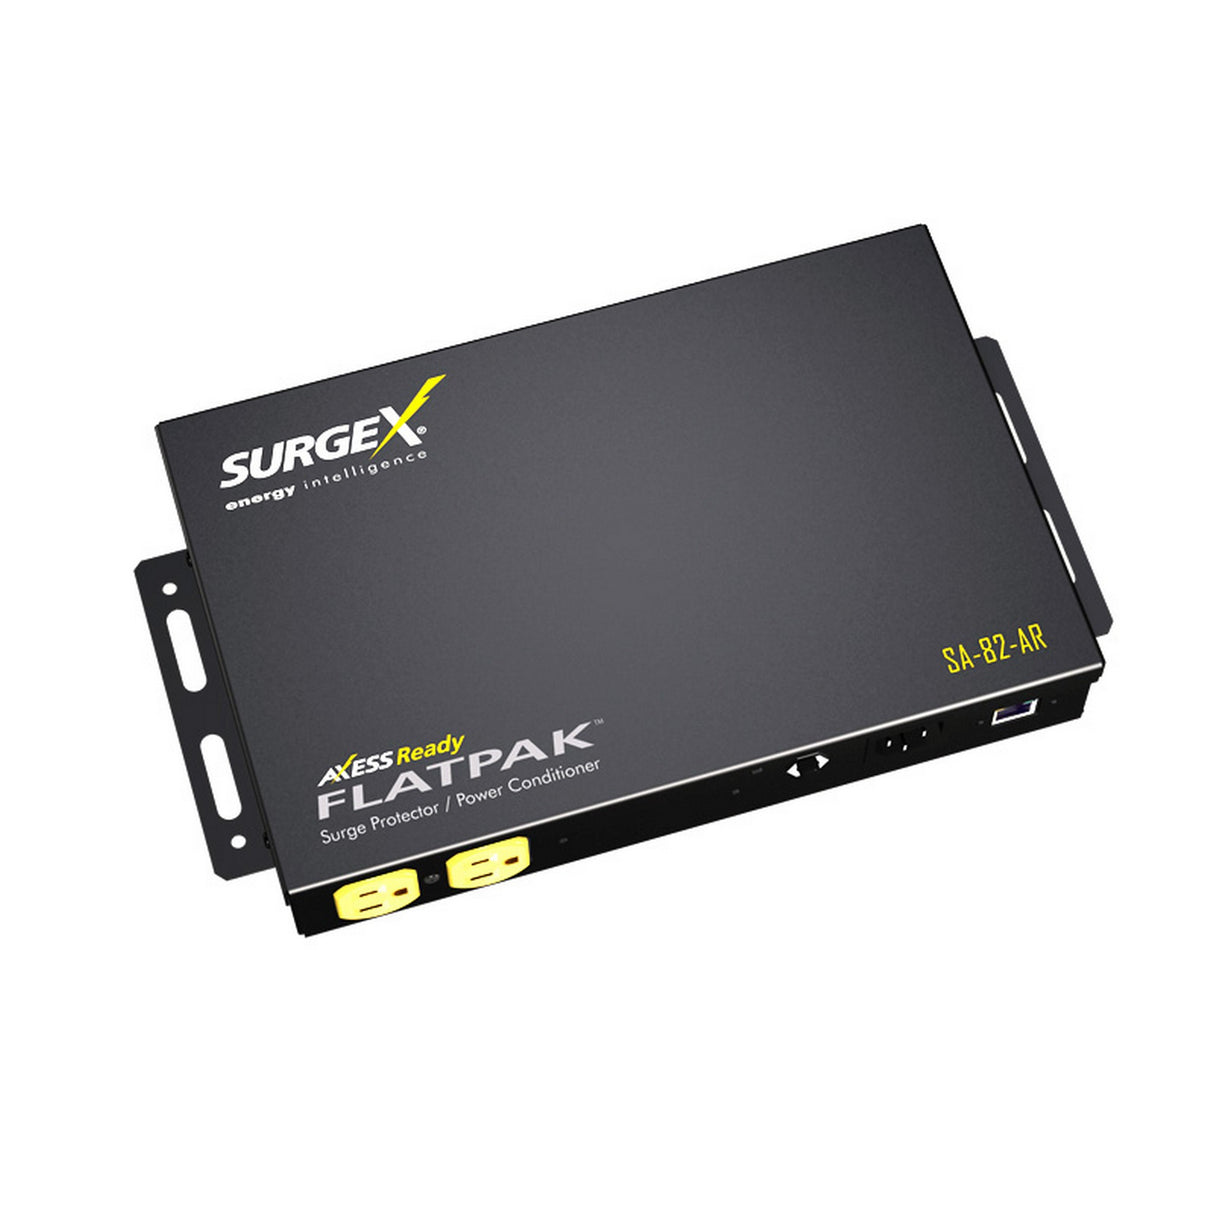 SurgeX SA-82-AR IP Connected 2 Receptacle Surge and Power Conditioner, 120V/8A